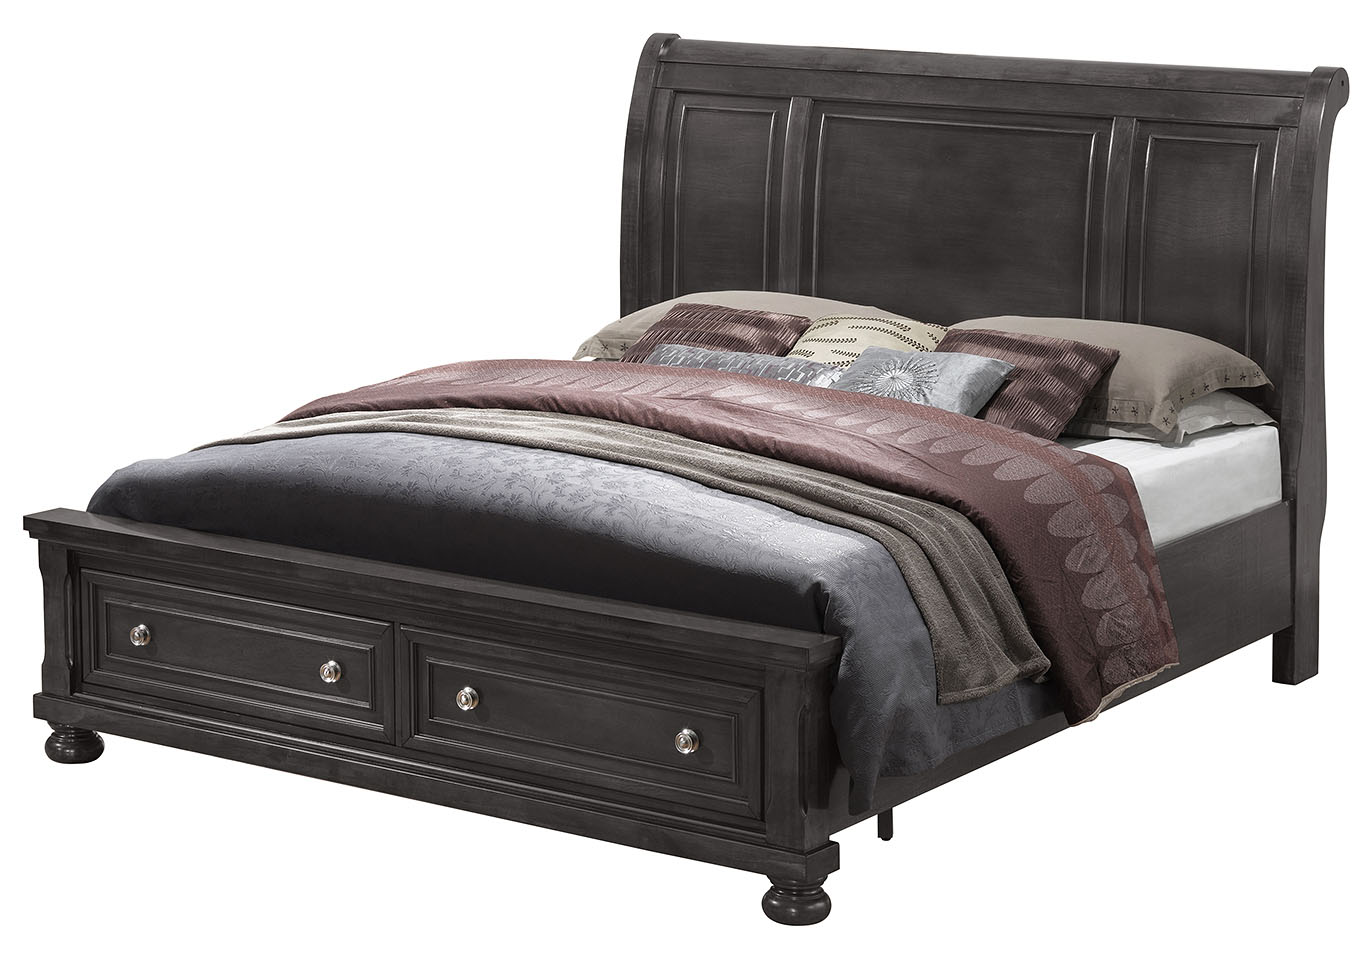 Gray 2 Drawer Storage Queen Bed,Glory Furniture